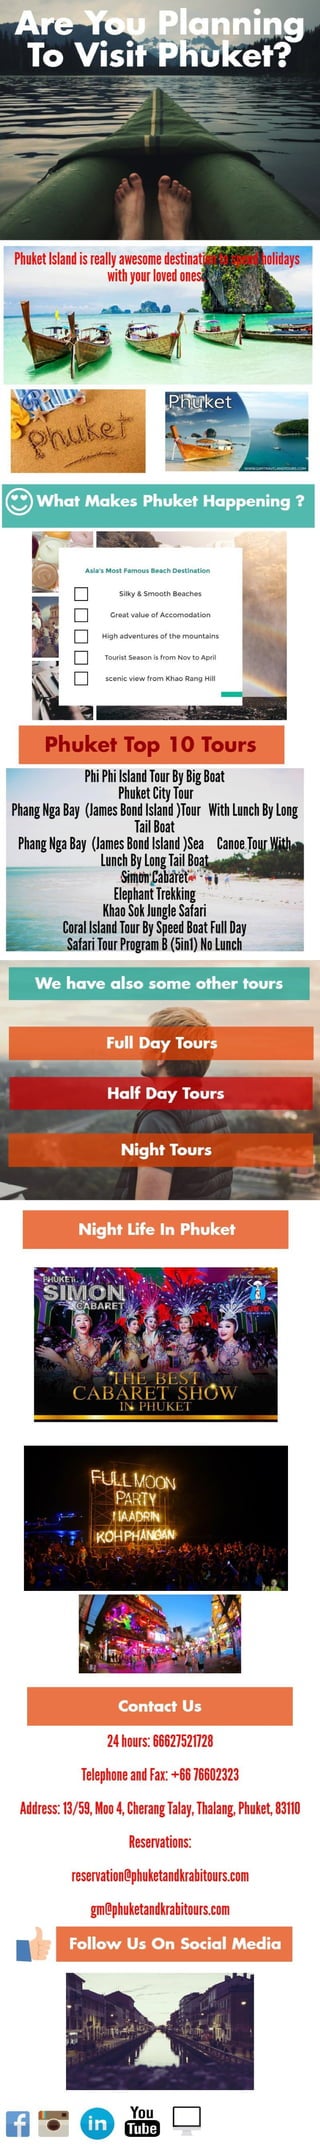 Are you planning to visit phuket tour?